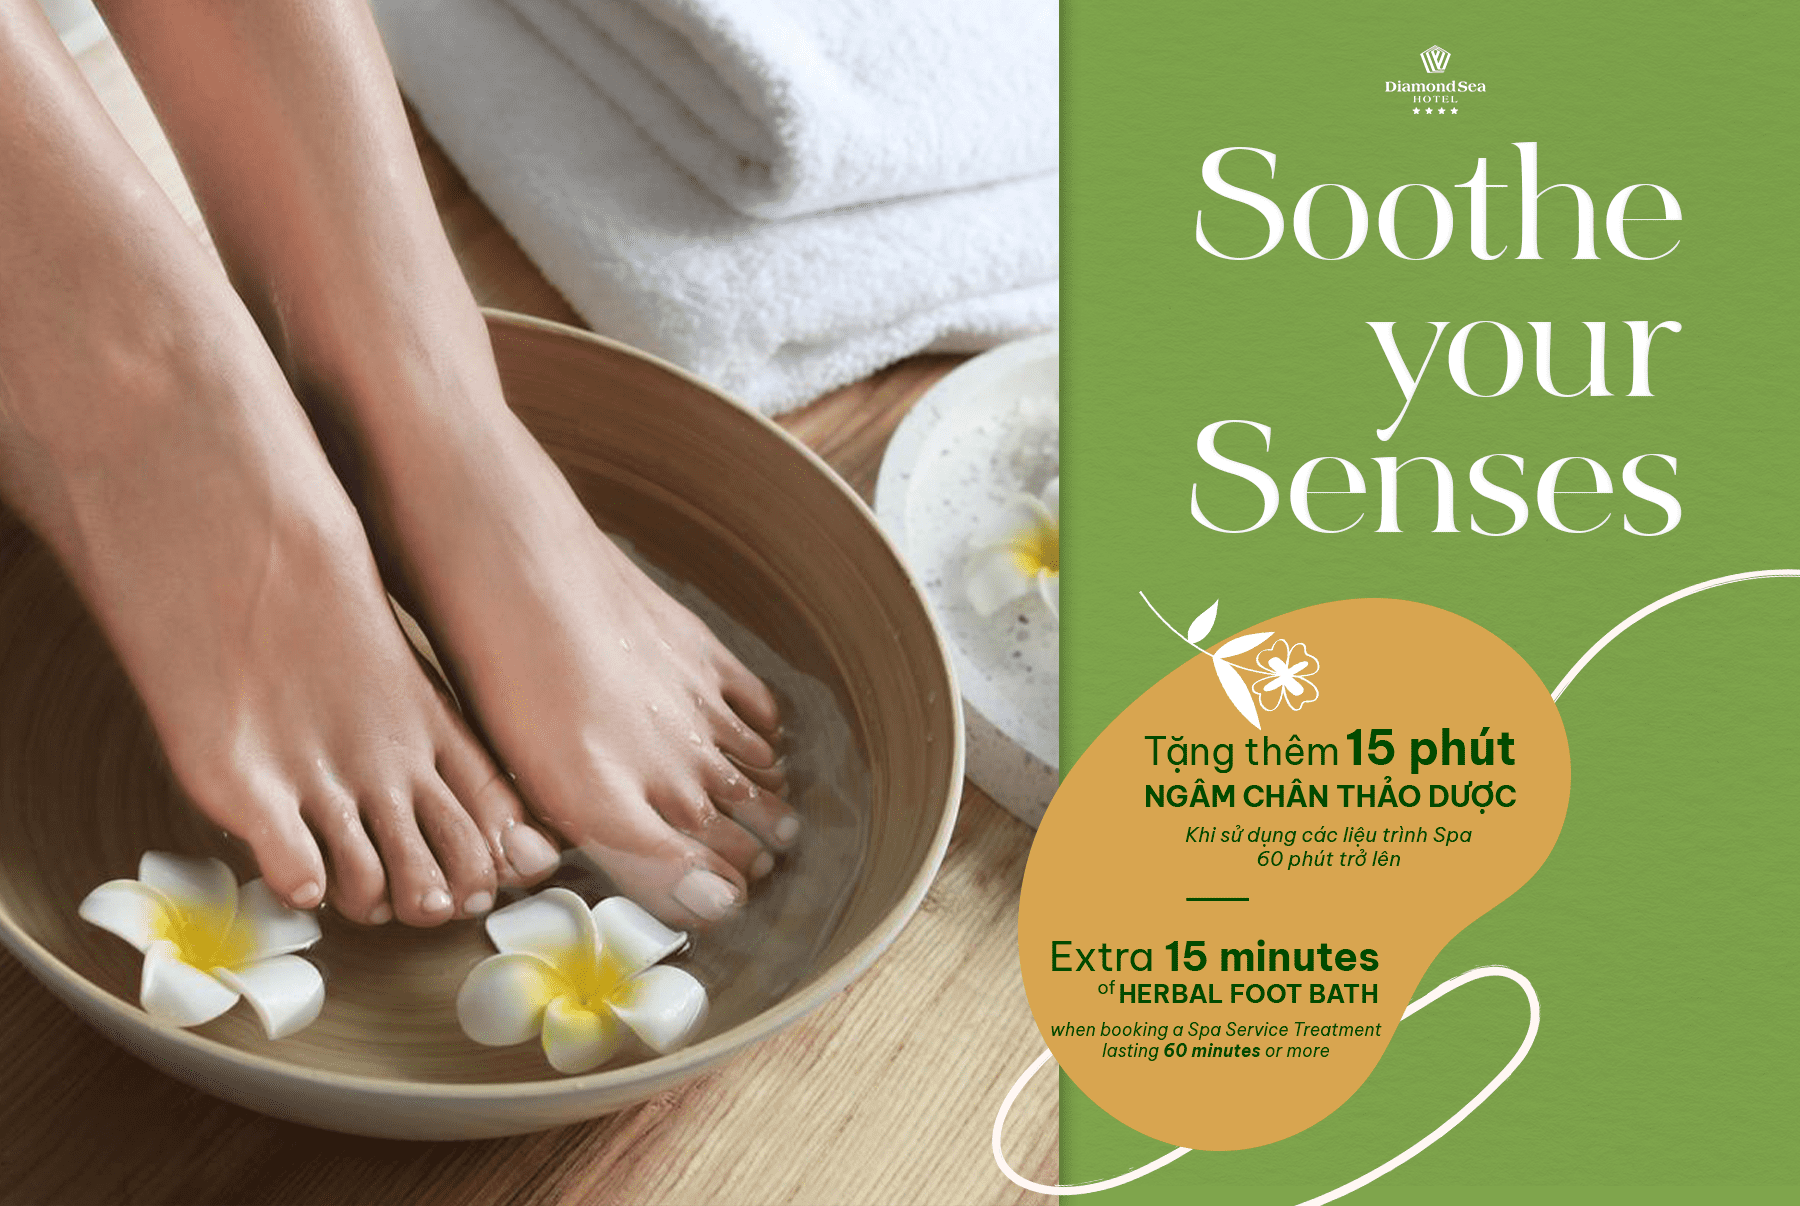 Spa Offer - “Soothe Your Senses”